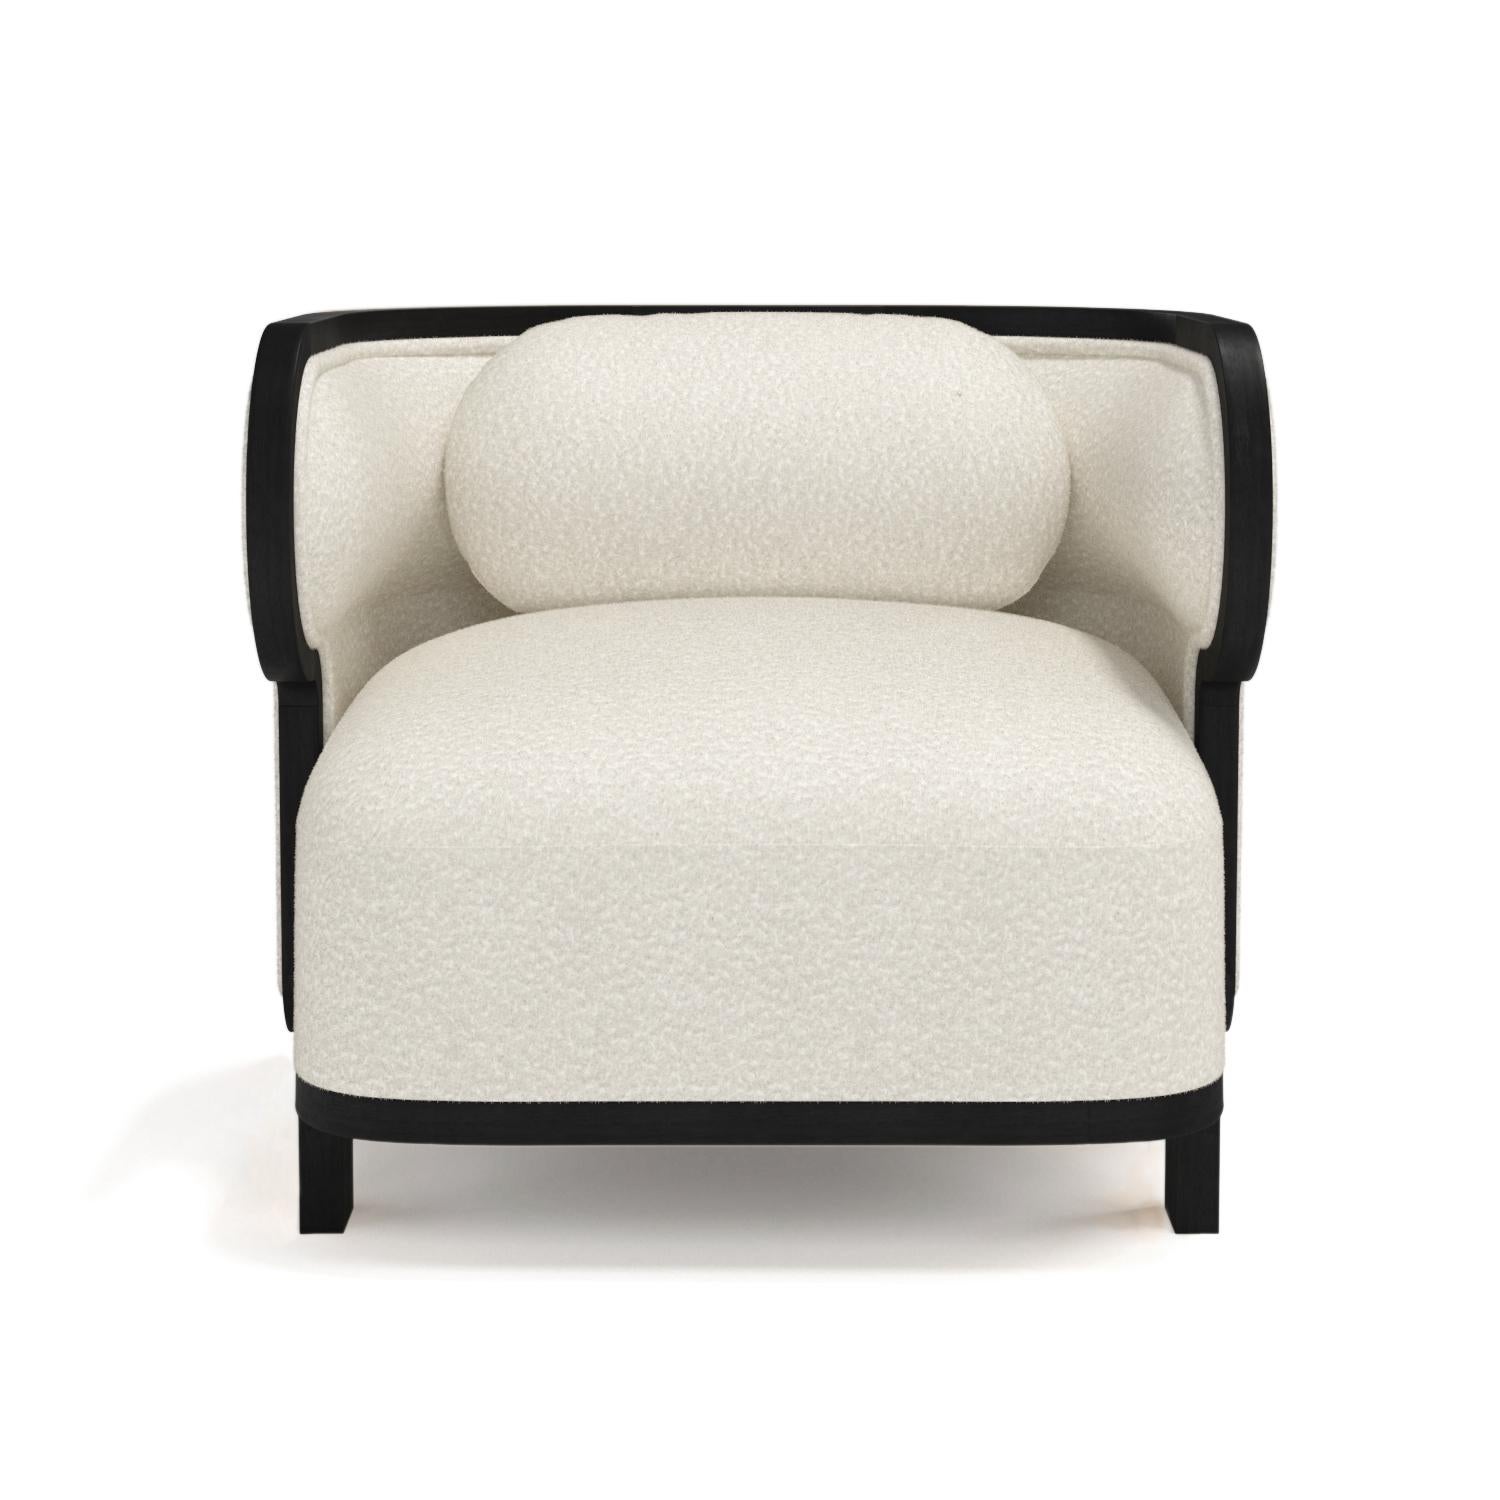 Odette Black Oak Club Chair by Fred and Juul
Dimensions: D 63 x W 66 x H 57 cm.
Materials: Black oak and wool.

Available in different oak finishes and wool colors. Custom sizes, materials or finishes are available. Please contact us.

The Odette